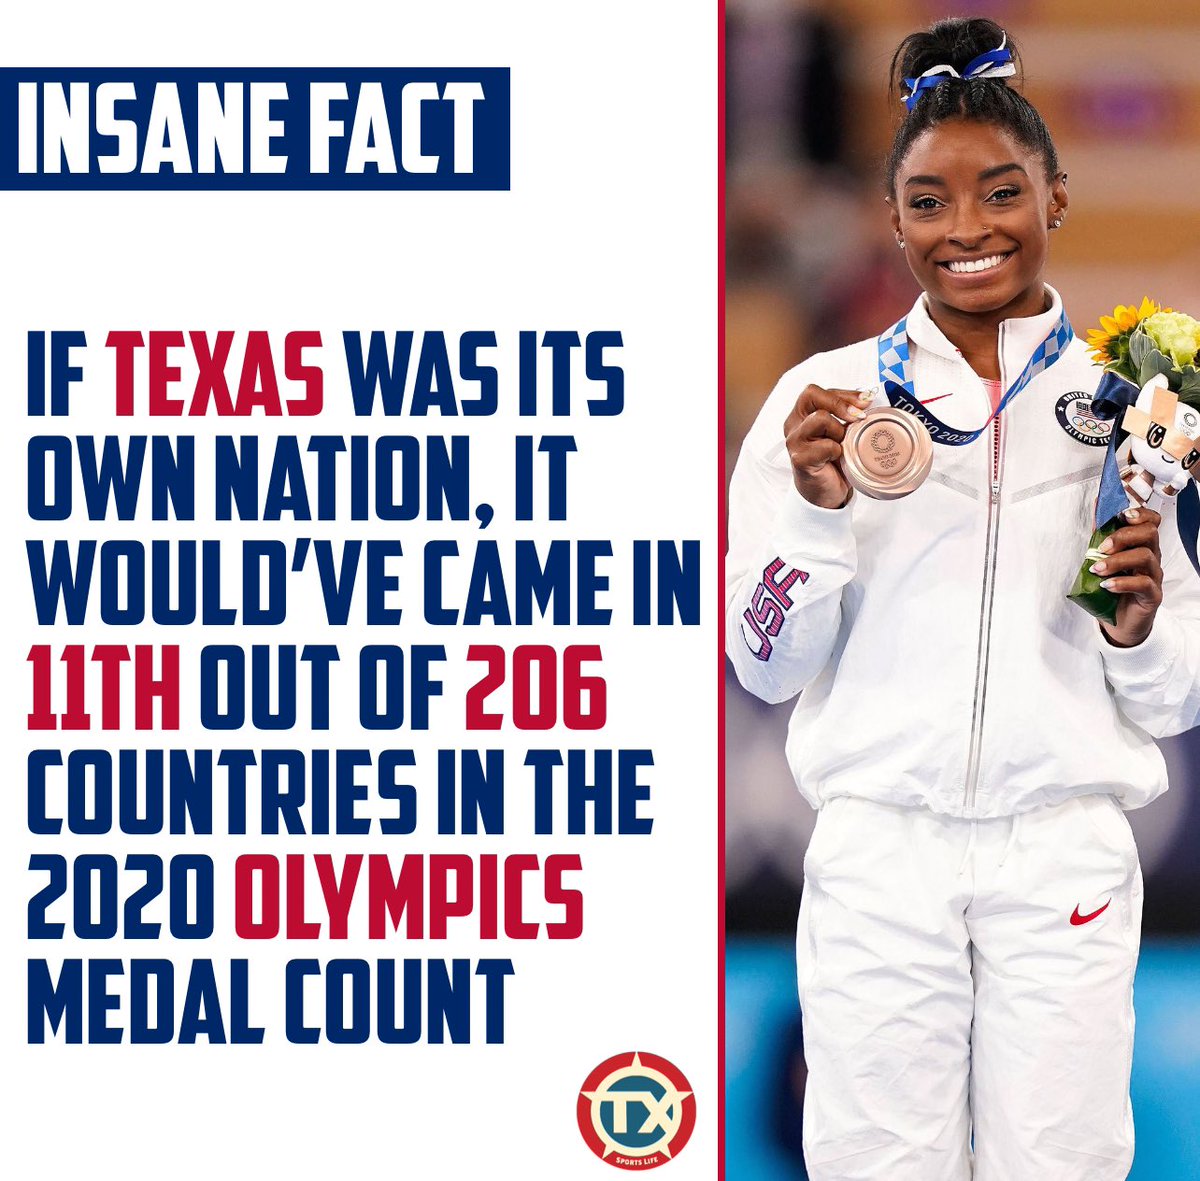 The greatest athletes in the world come from Texas 🤠